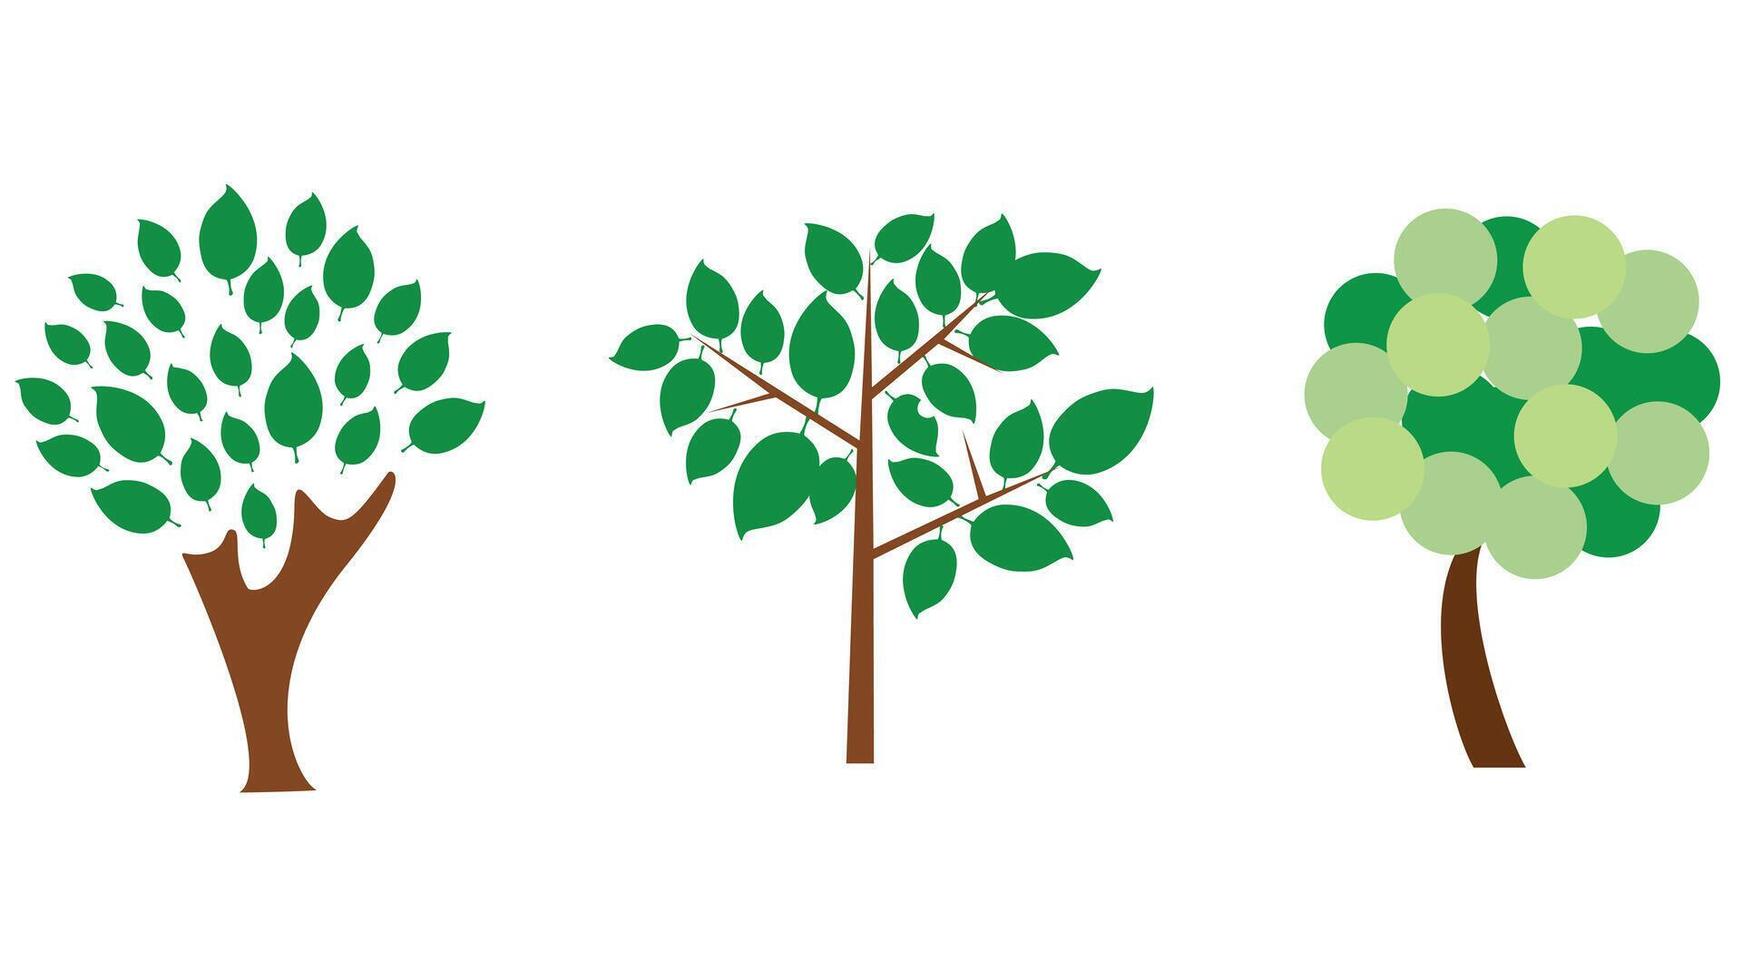 Trees and green leaves collection vector art illustration isolated